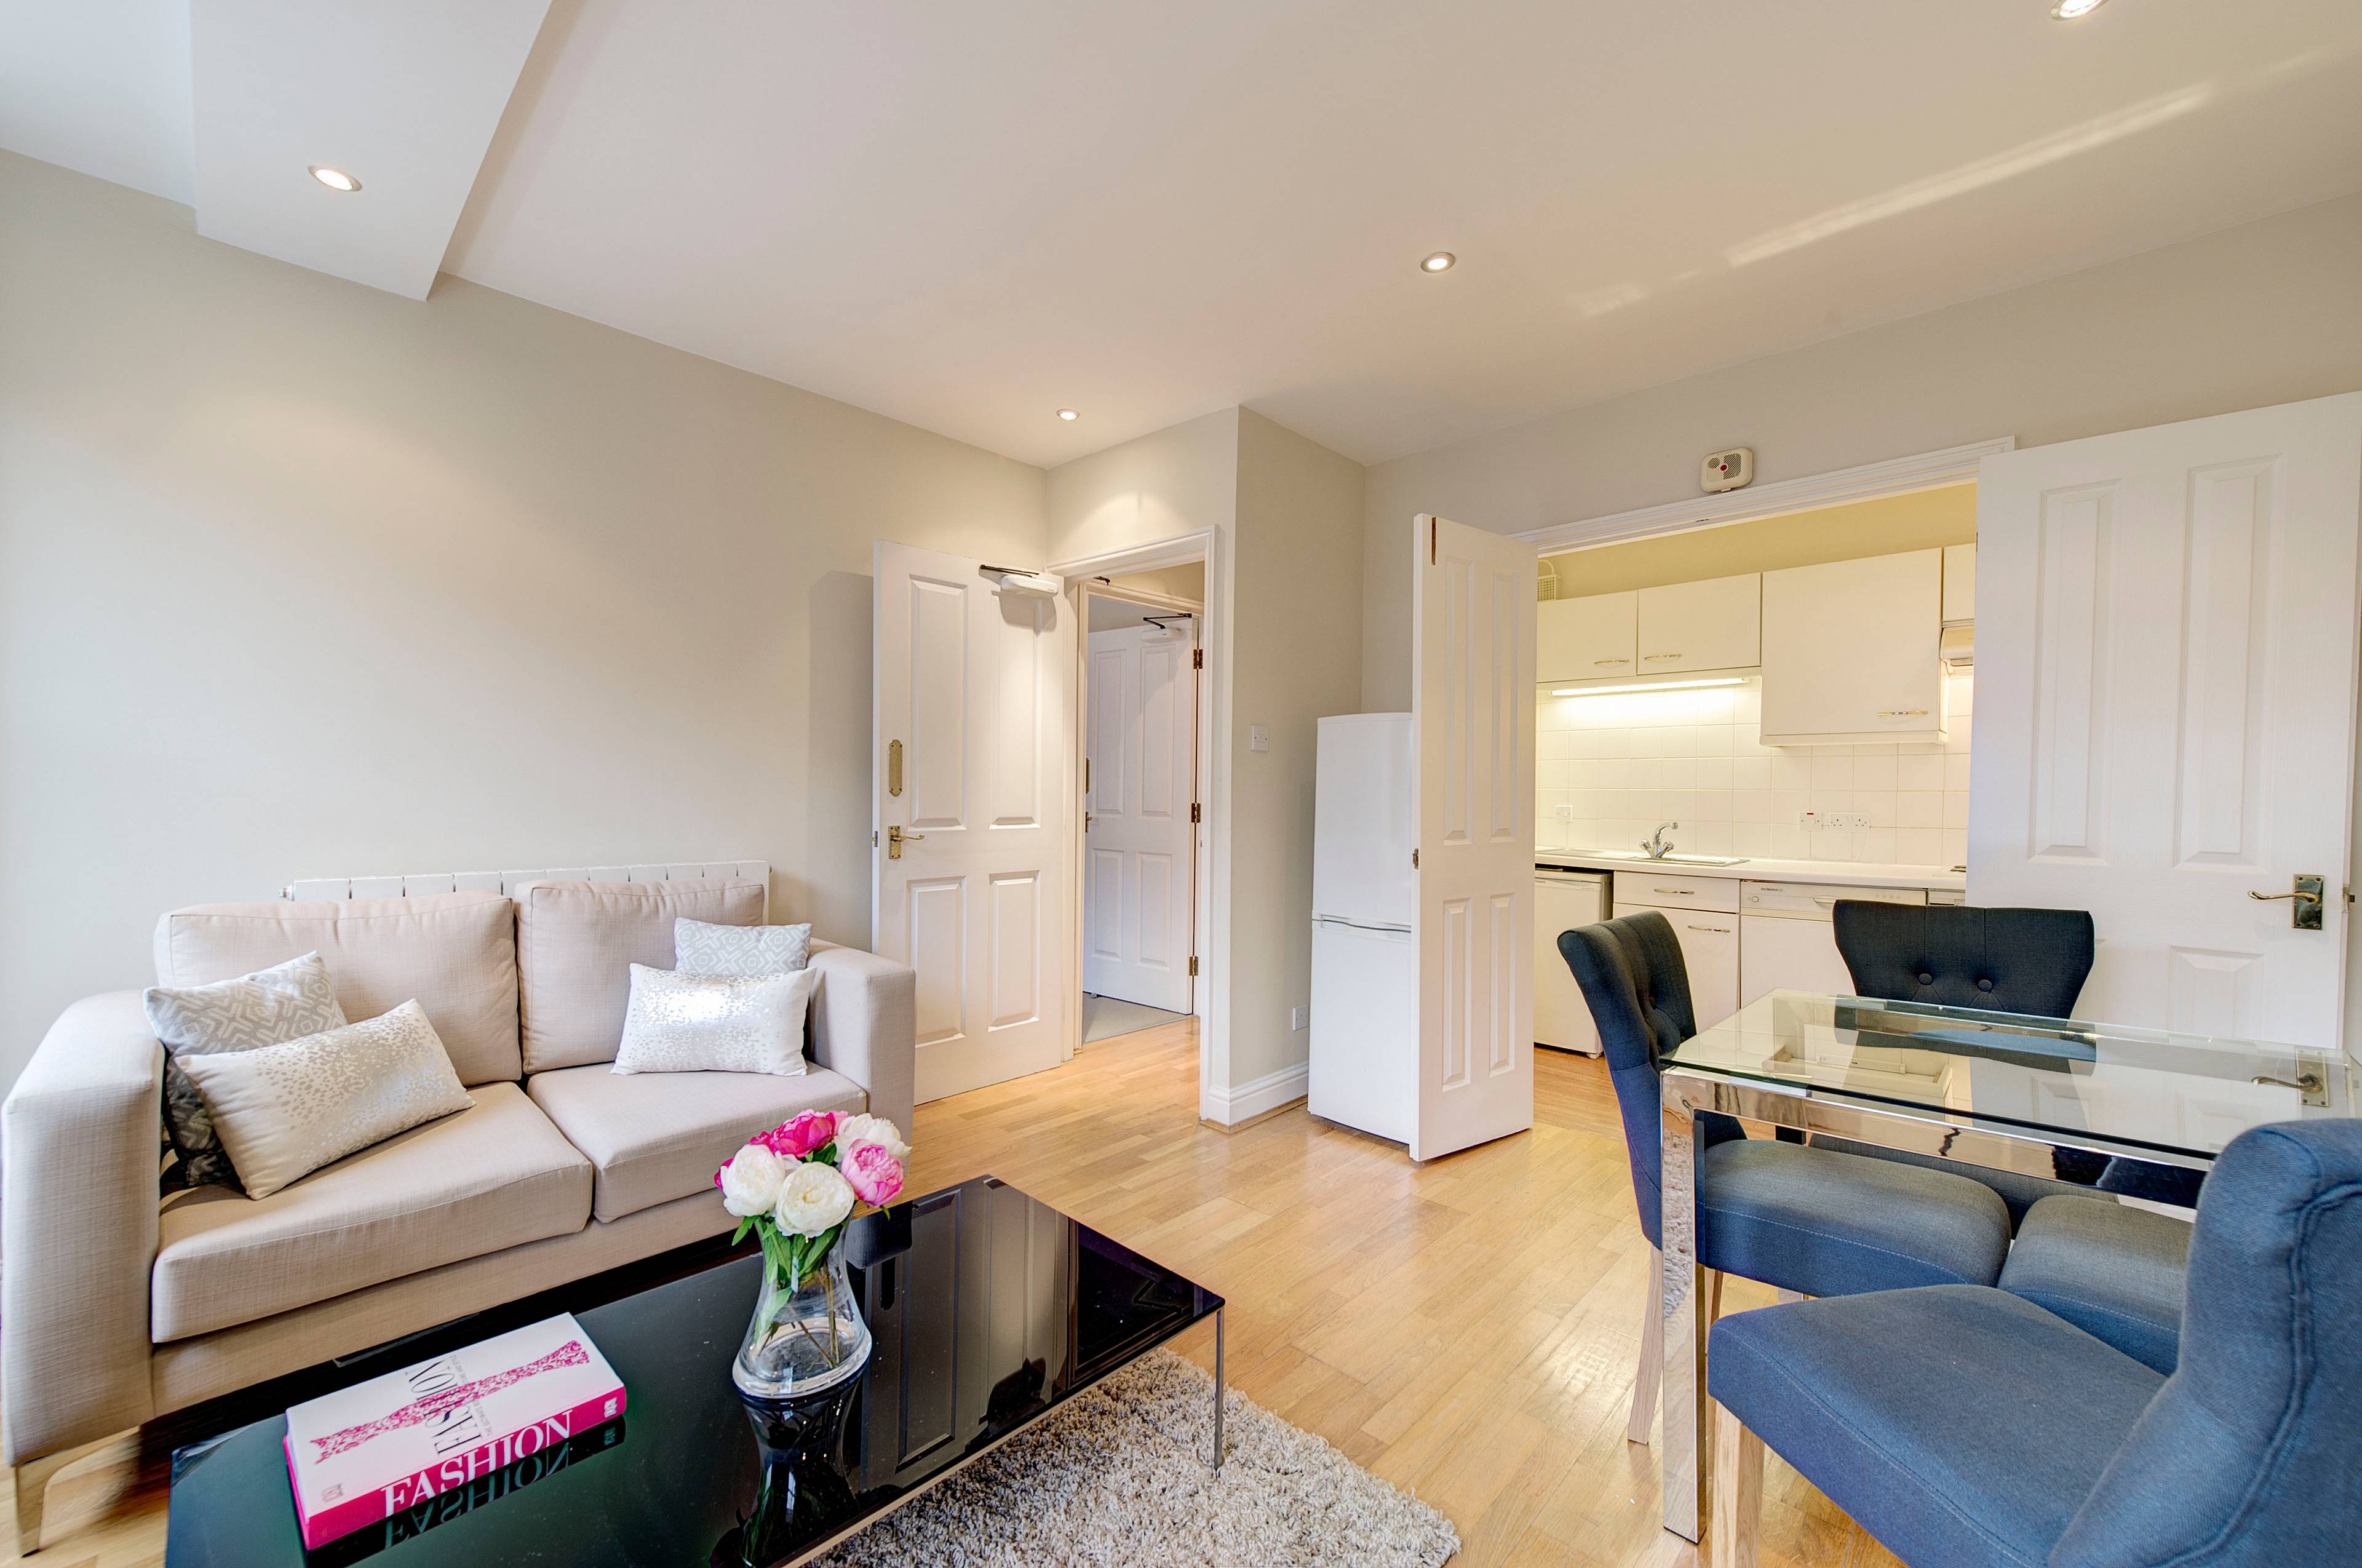 Wonderfully lit and centrally located 2 bed apartment situated on Marylebone High Street